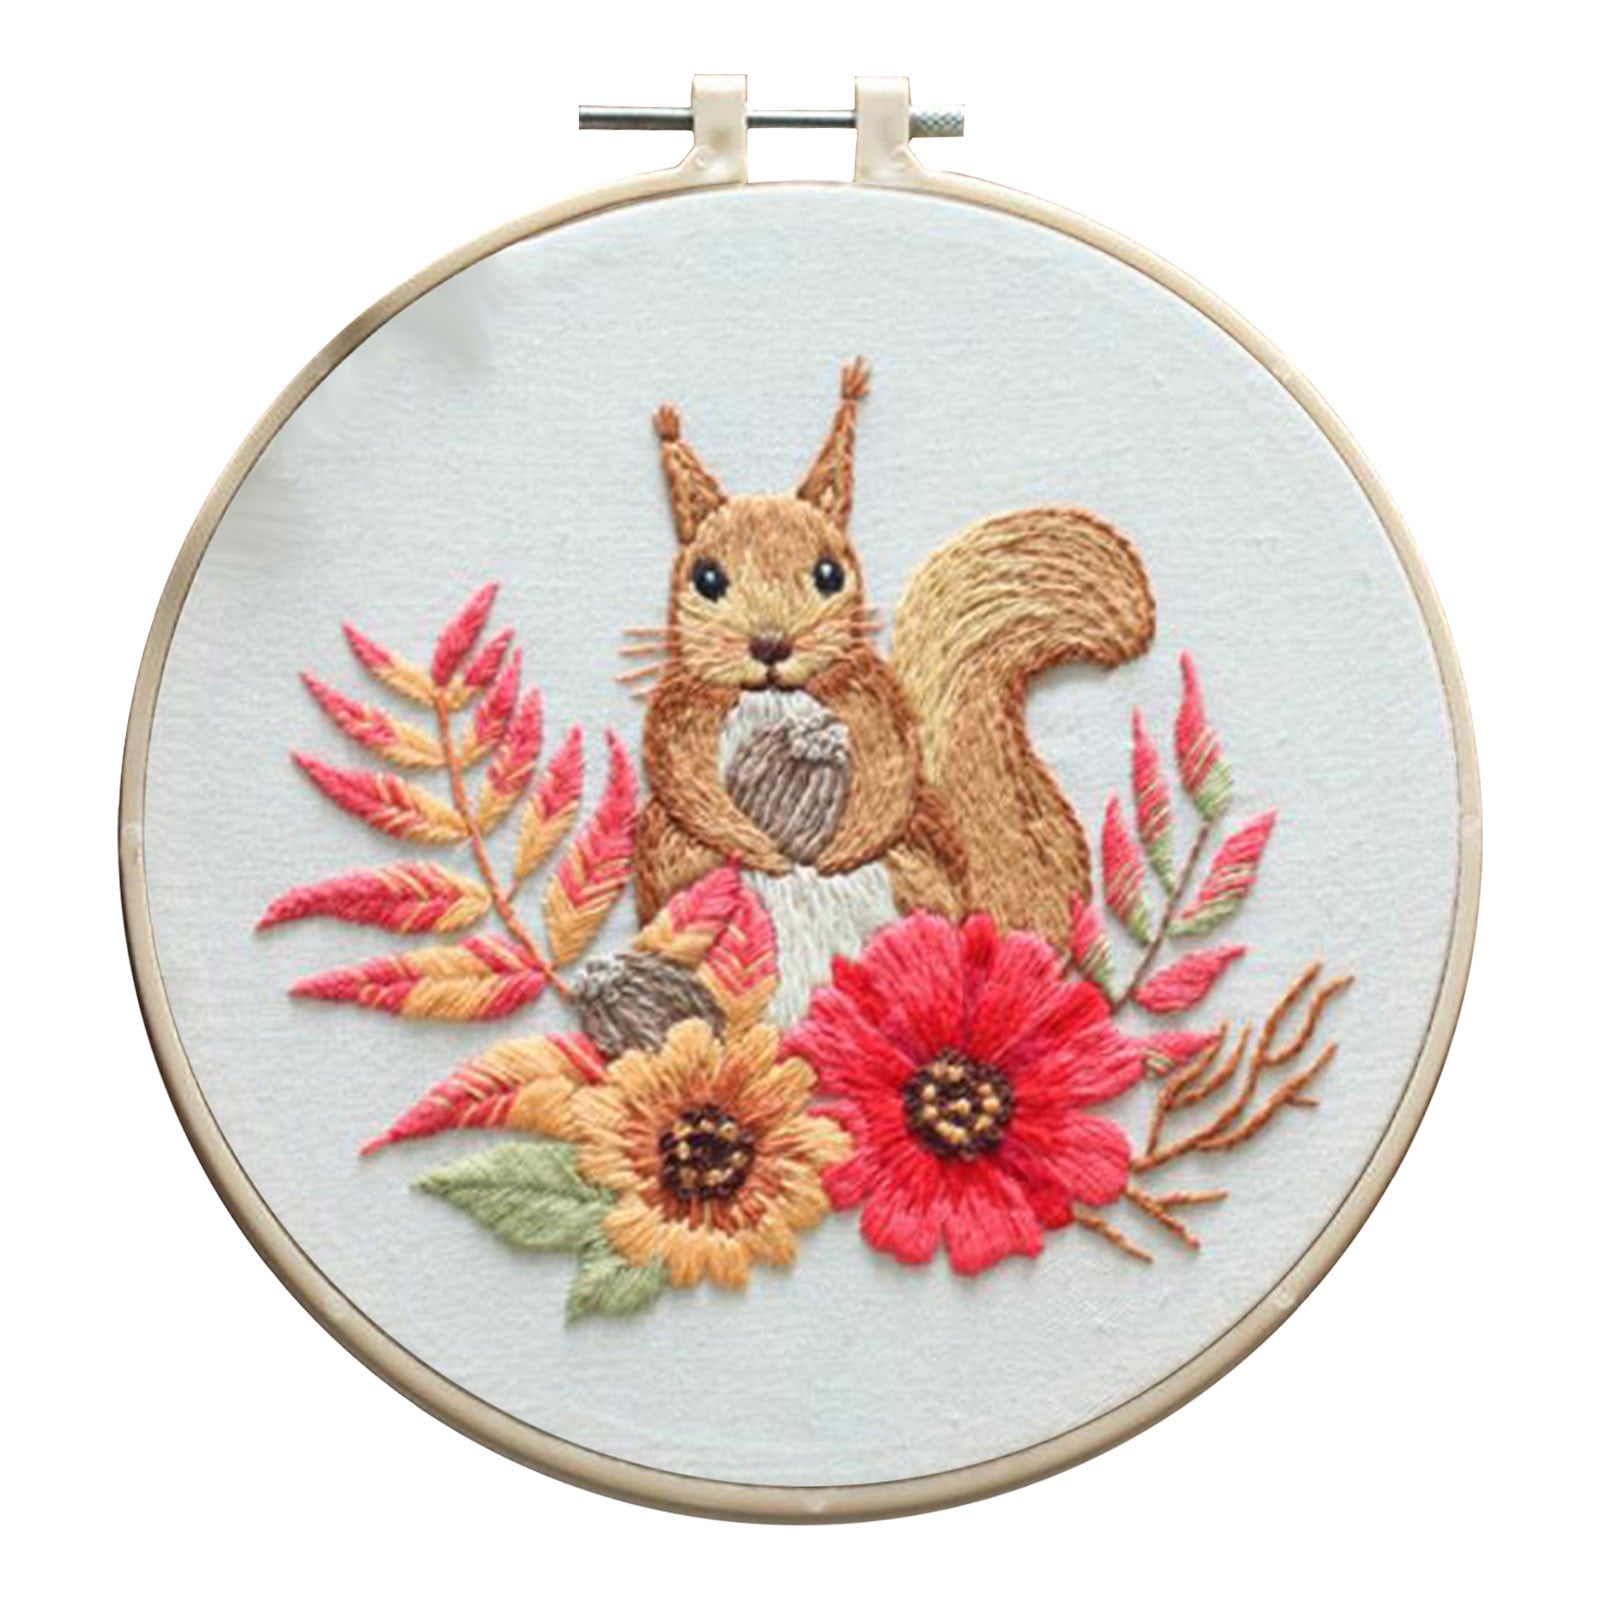 Wovilon Cross Stitch Tools And Beginner Embroidery Kits For Adults And  Children